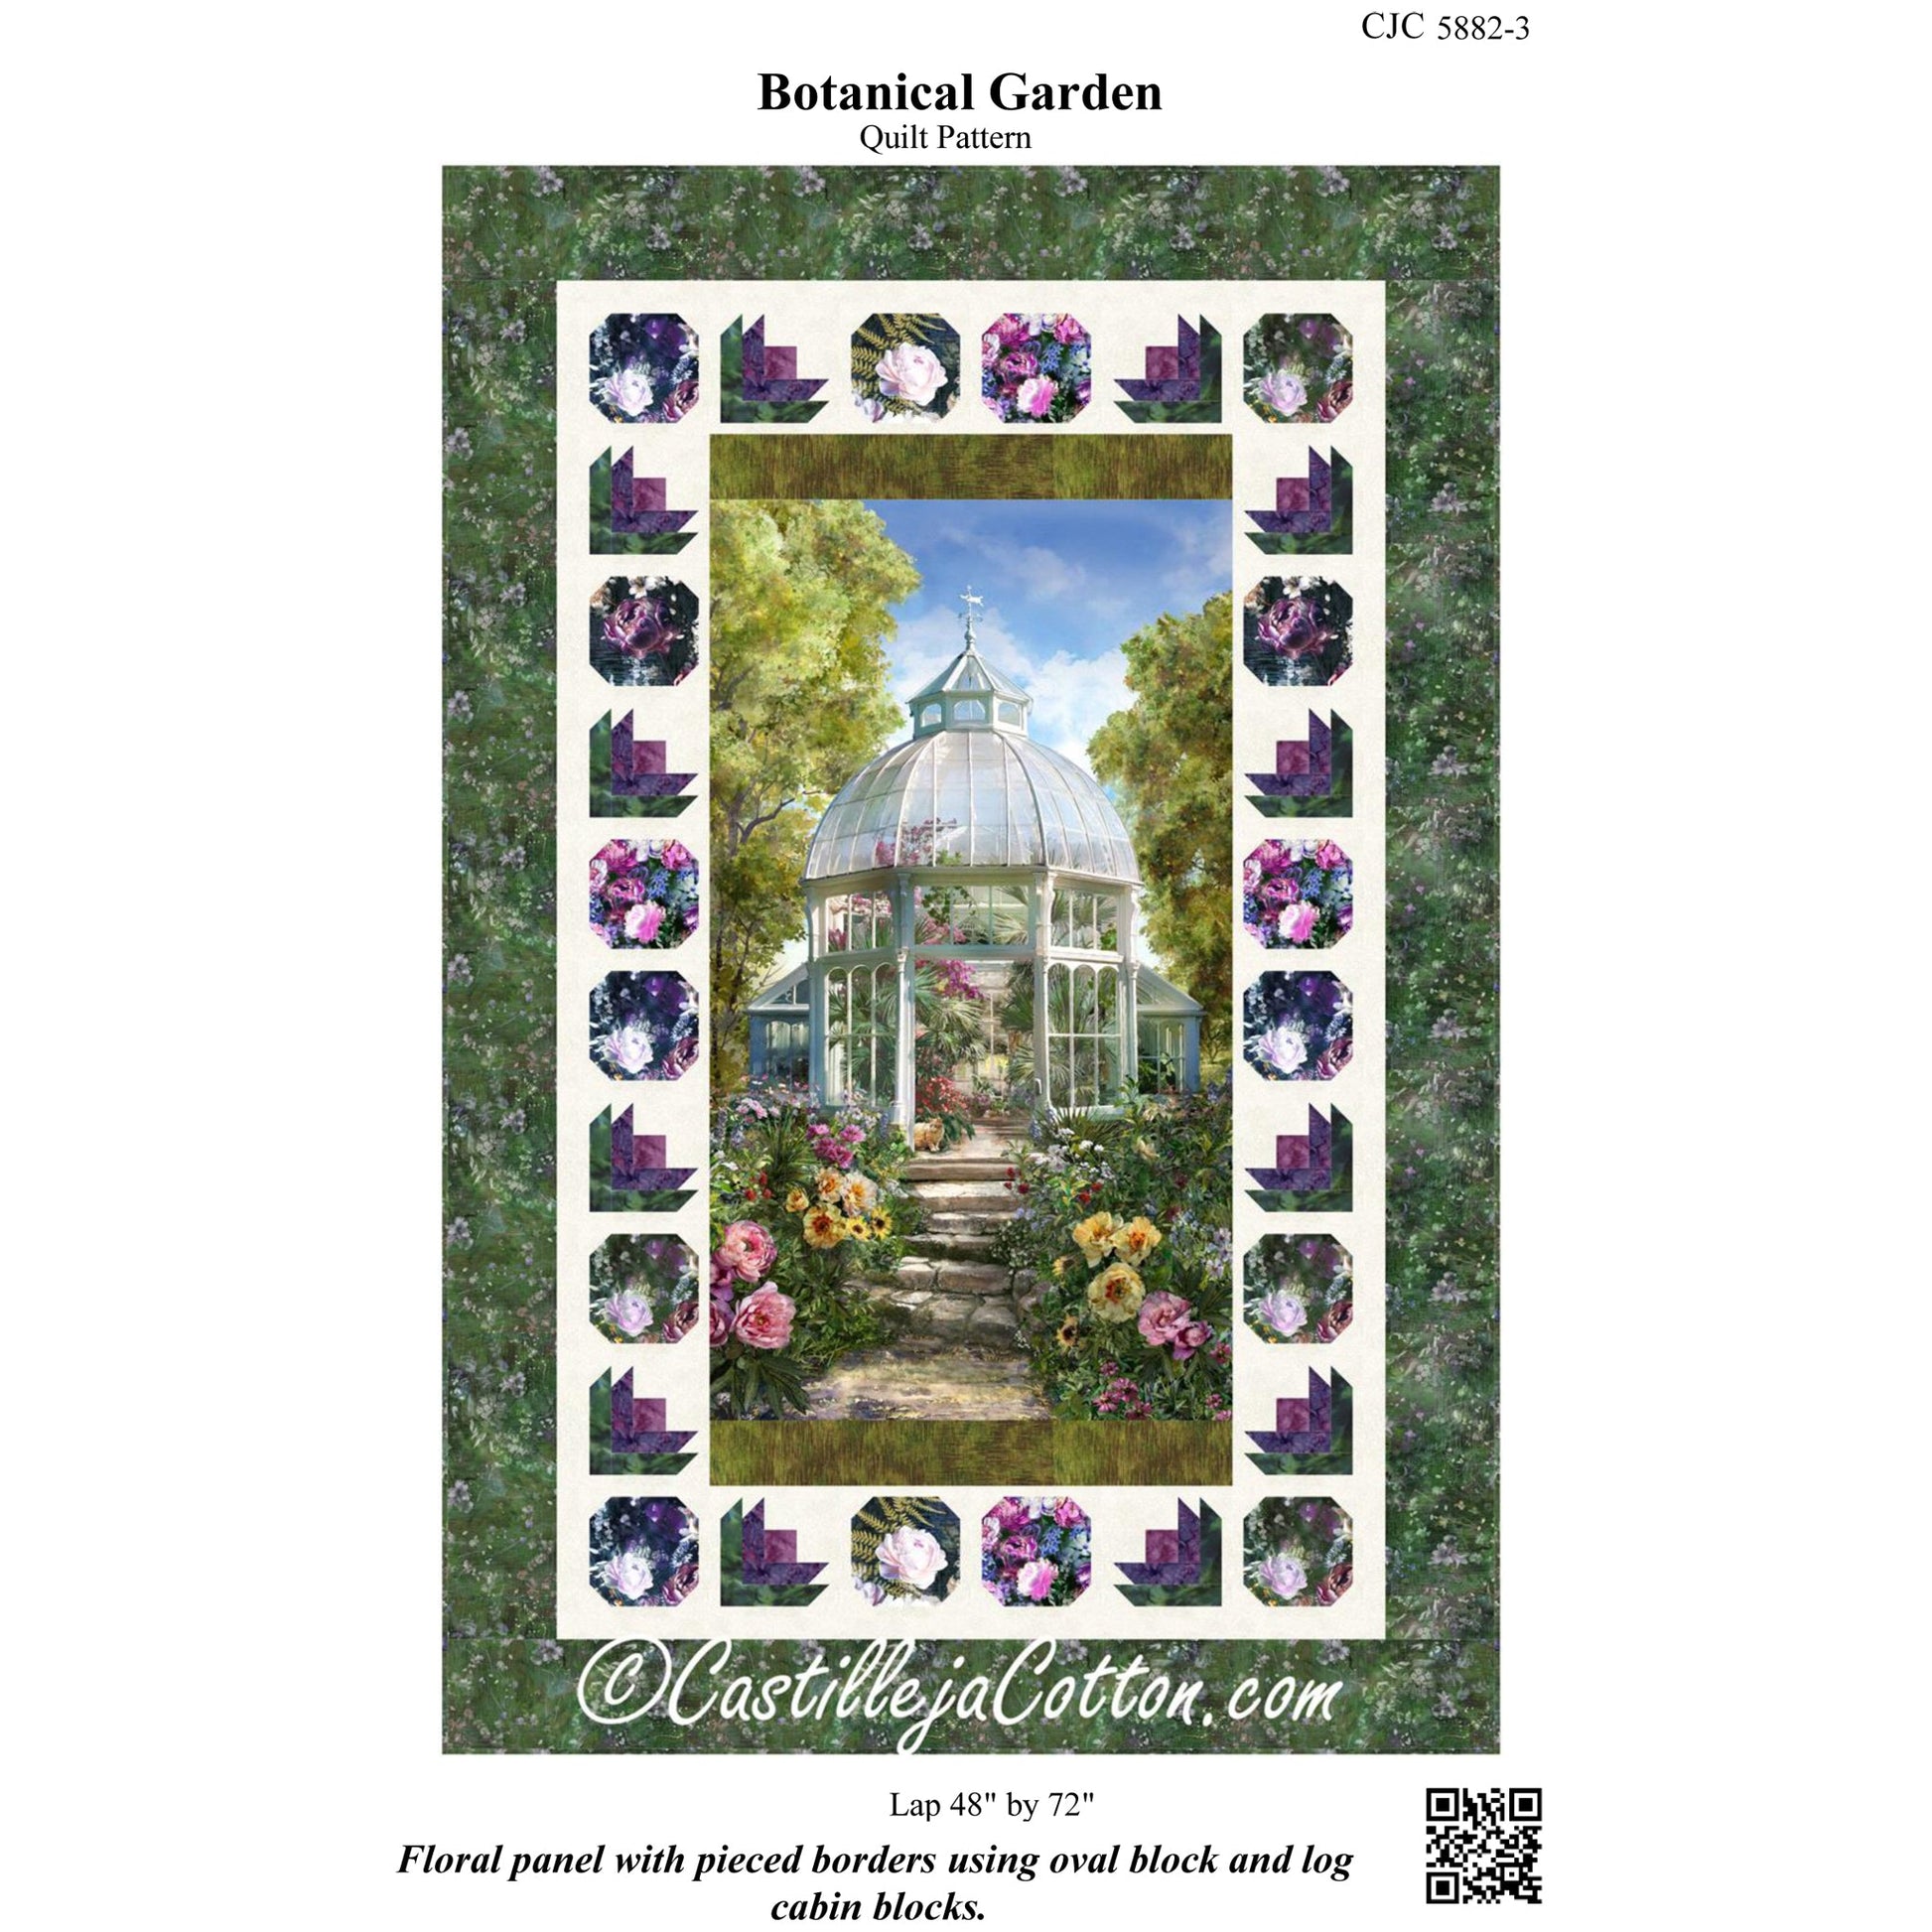 Cover image of pattern for Botanical Garden quilt.